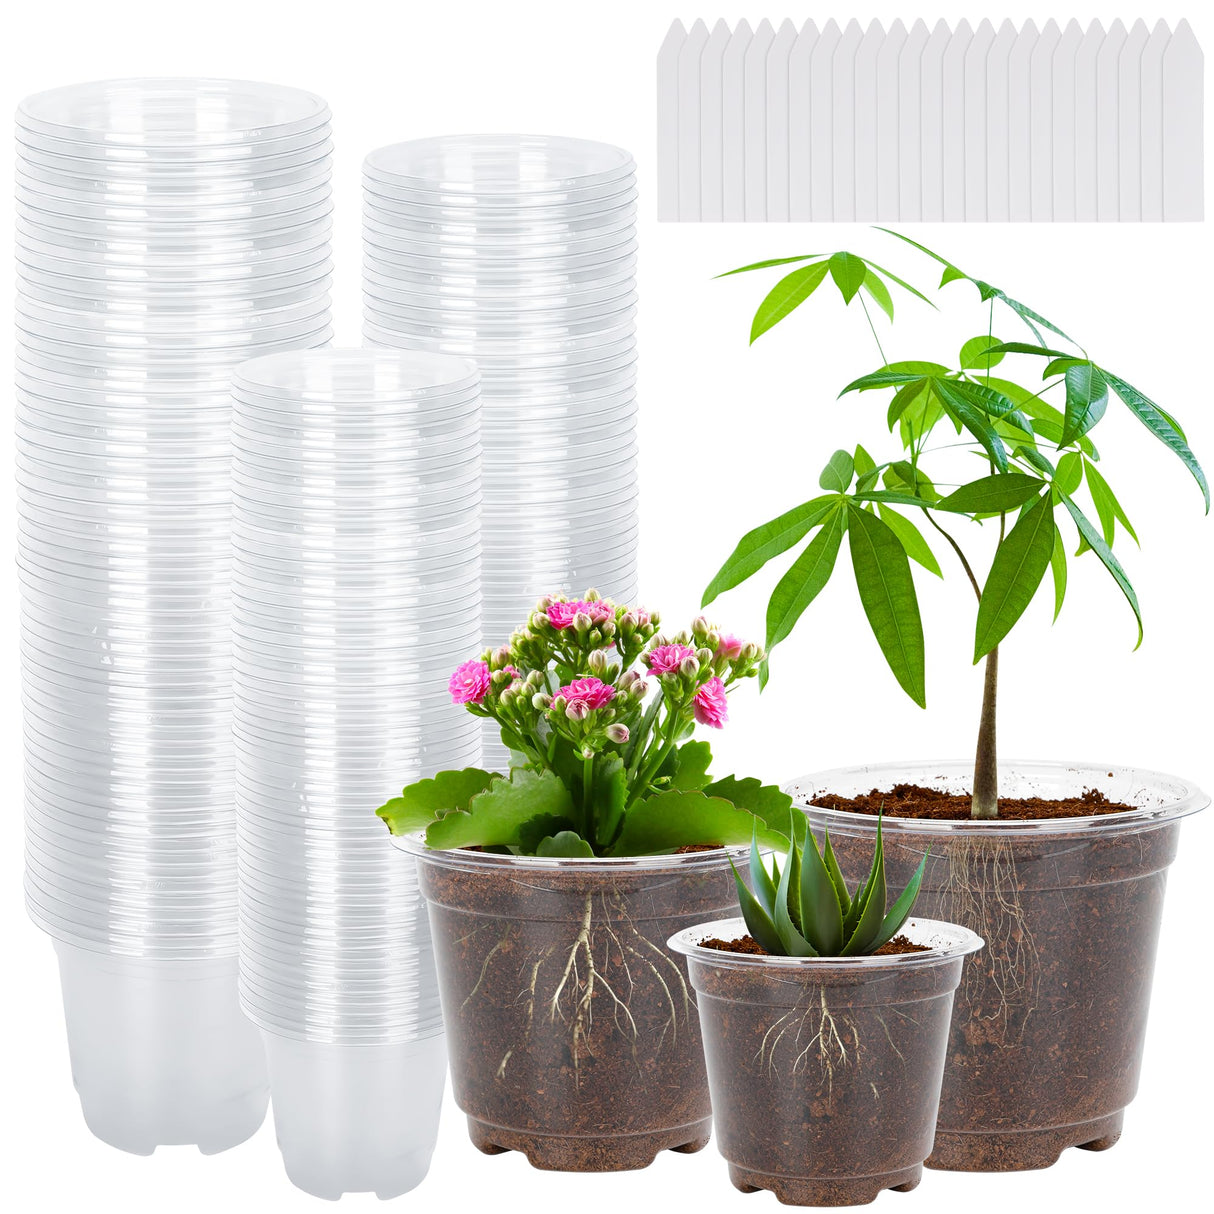 Helimoto 50 Pack 3.5/4/5 Inch Plant Pots, Clear Nursery Pots, Plastic Seedling Pots with Drainage Holes Transparent Seed Starter Planter Pots with 50 Plant Labels for Flower Vegetable Plants